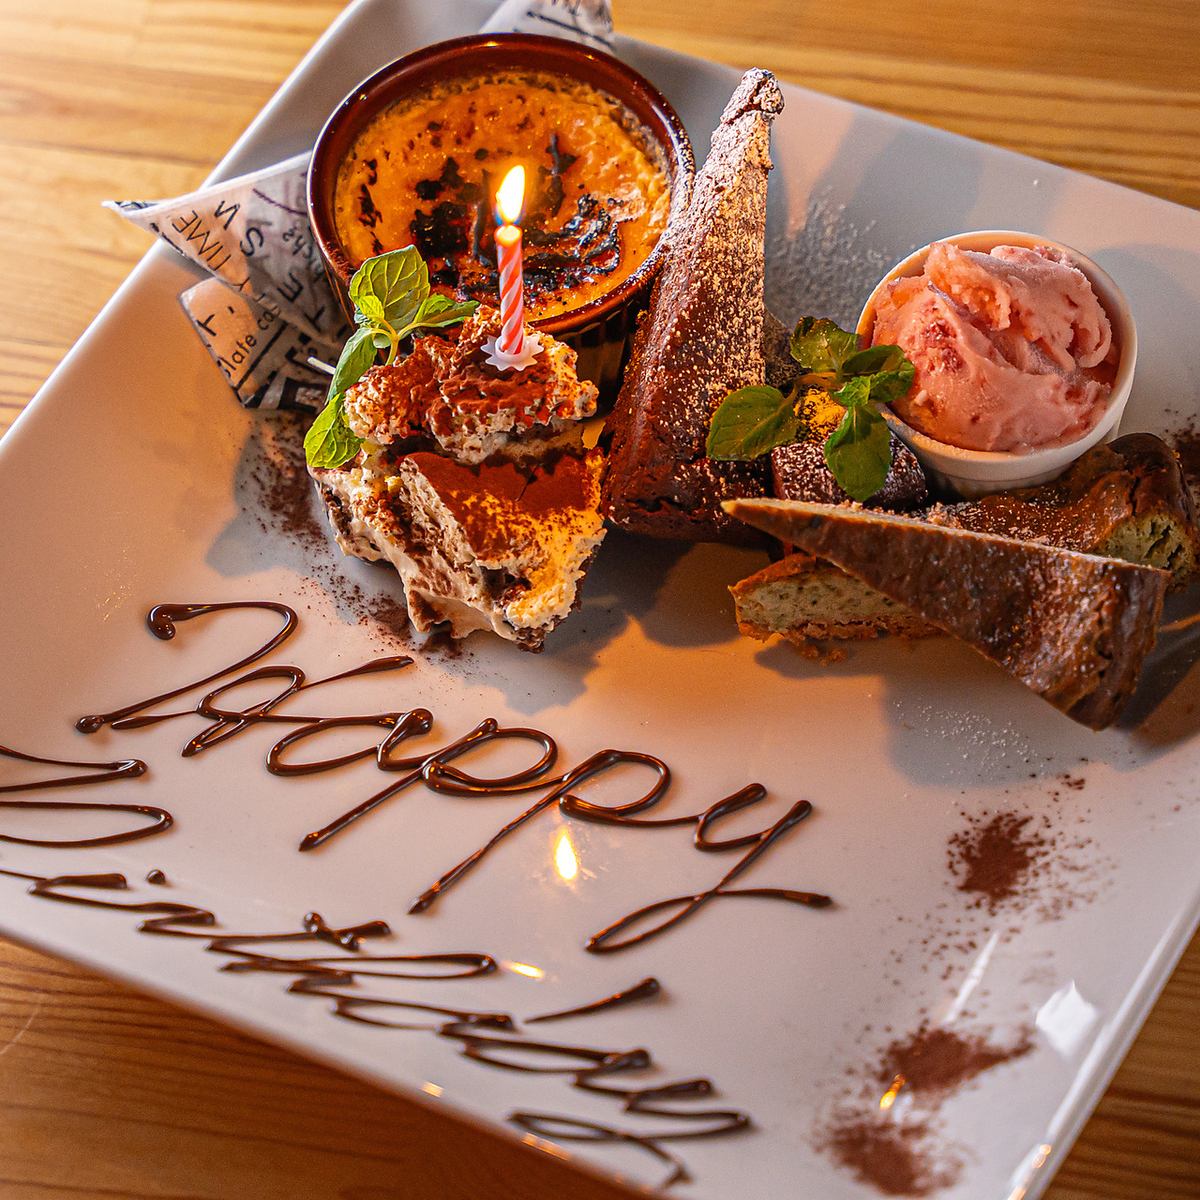 We can surprise you with a birthday plate! Please feel free to contact us♪